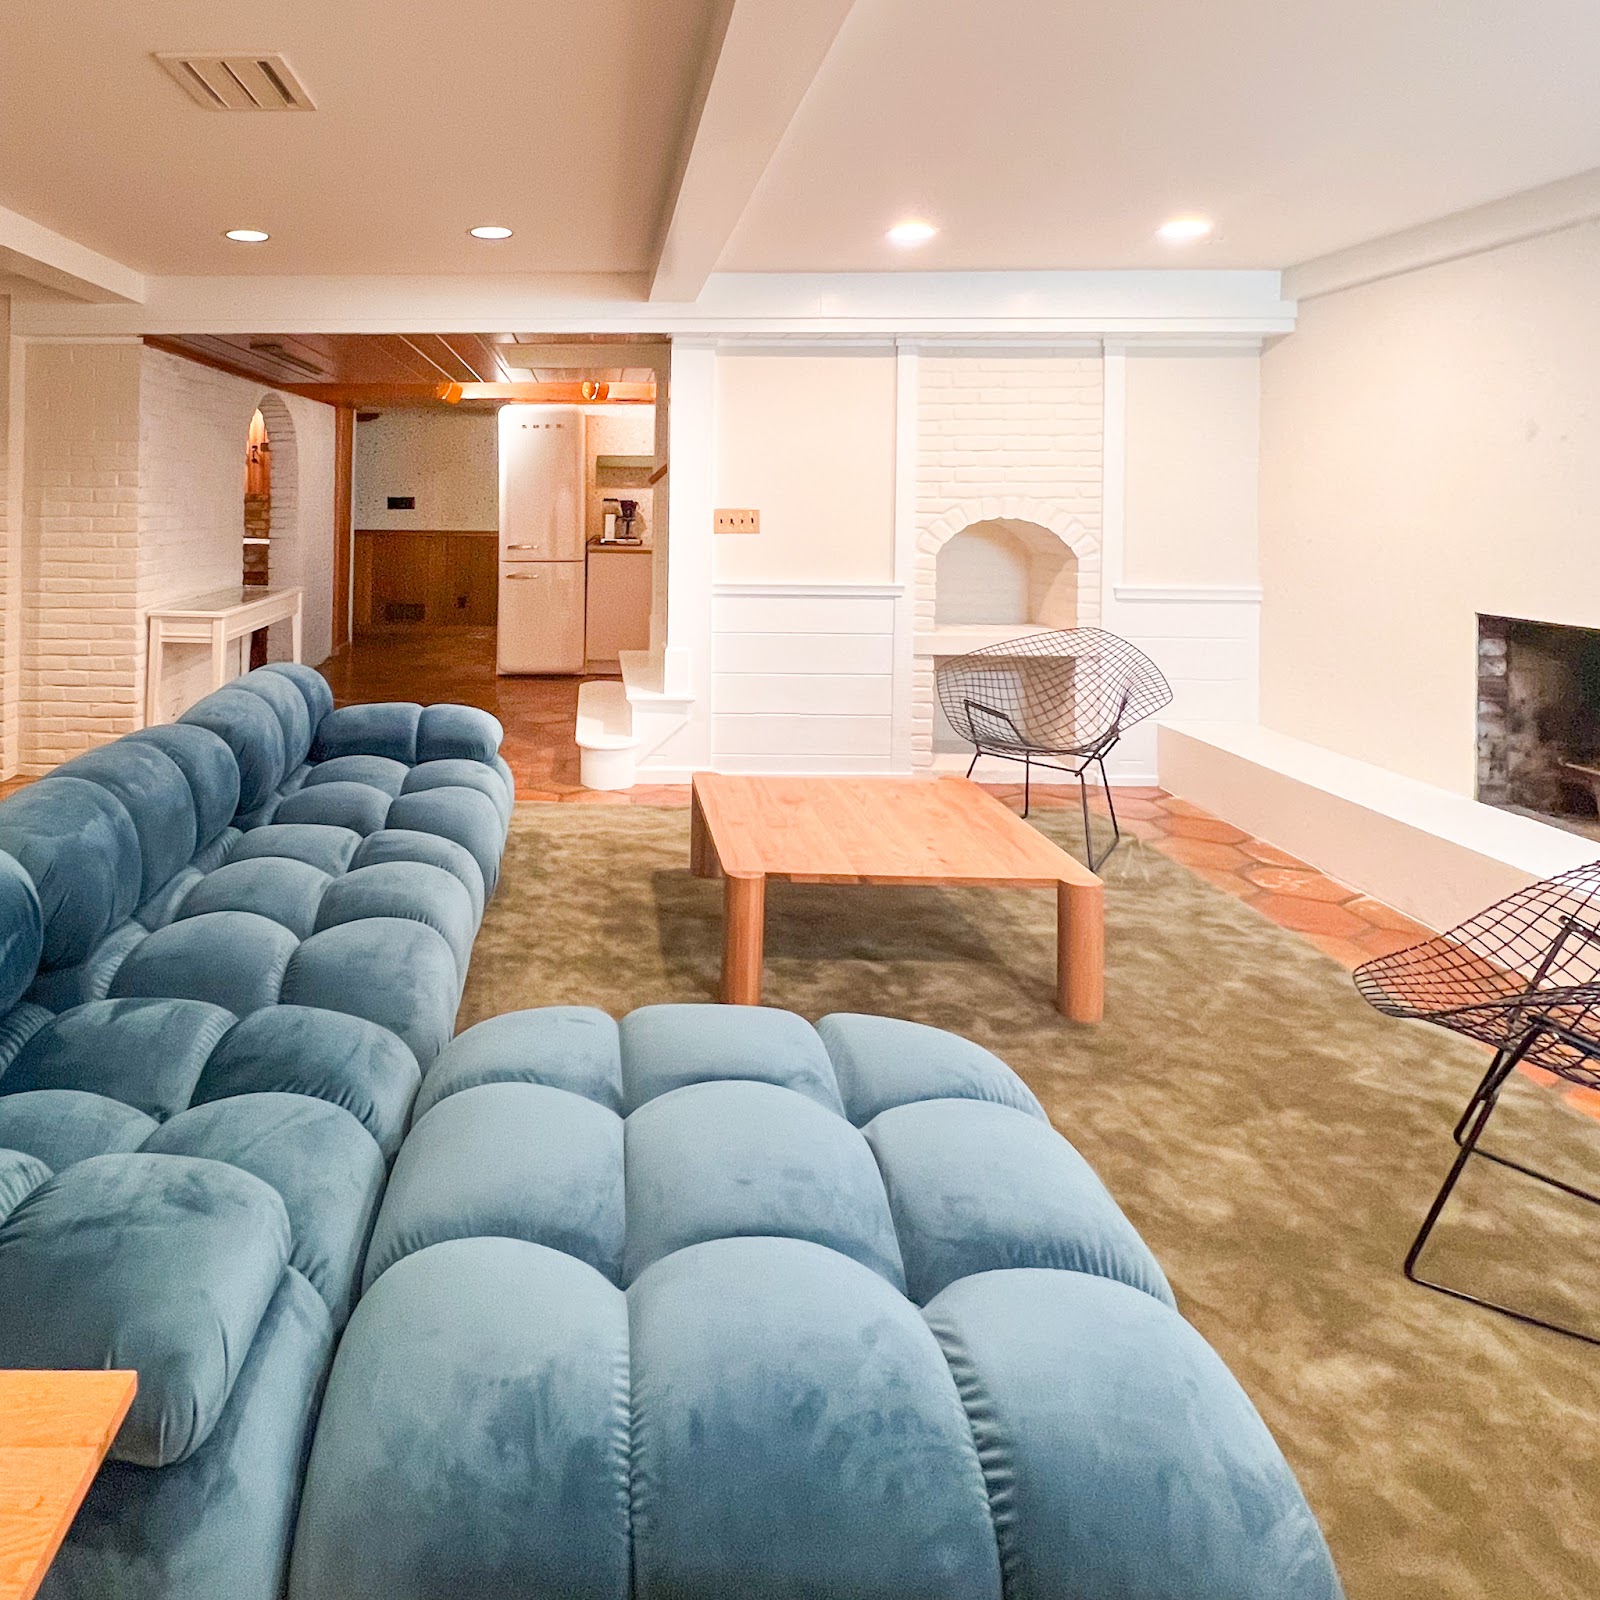 A basement family room with white and cream walls, plush green rugs, a blue modular sofa, a white oak coffee table, and vintage Bertoia diamond chairs